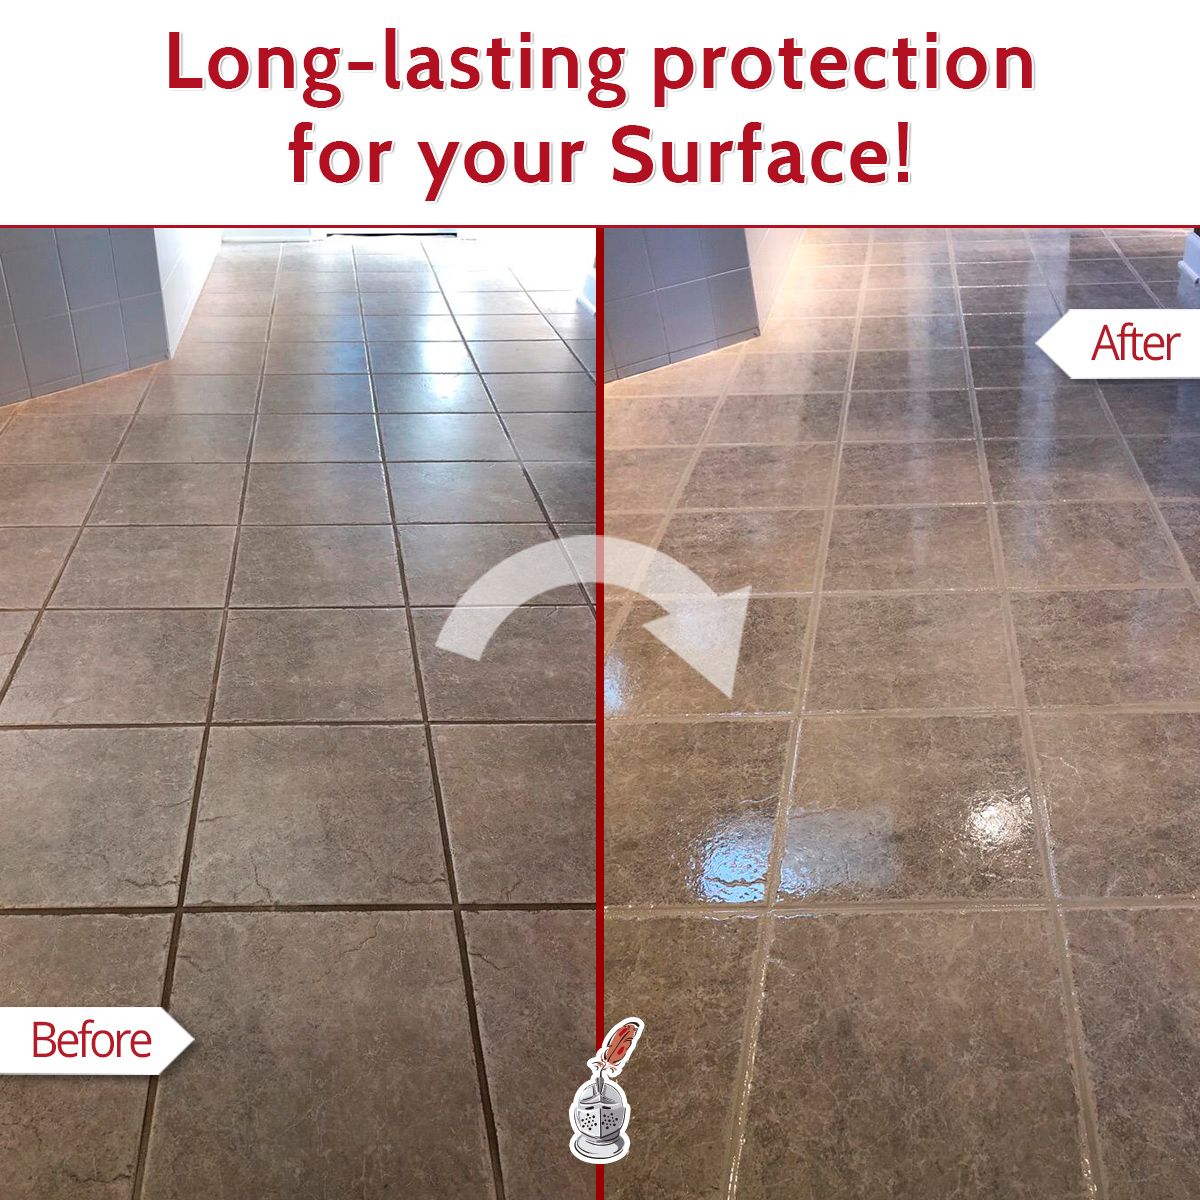 Long-lasting Protection for Your Surface!